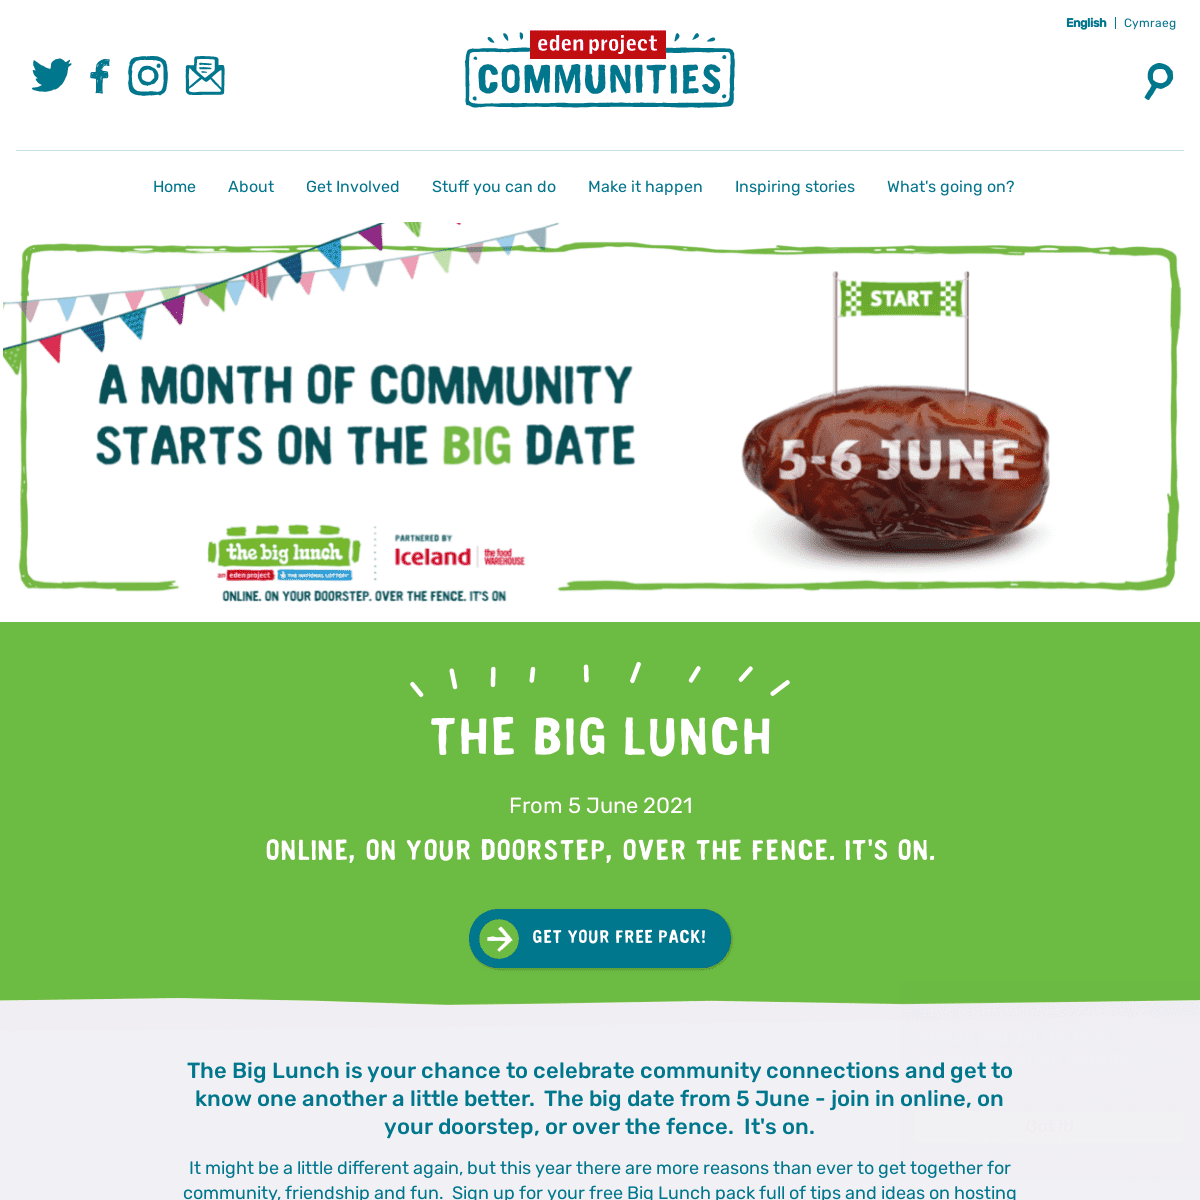 A complete backup of https://thebiglunch.com